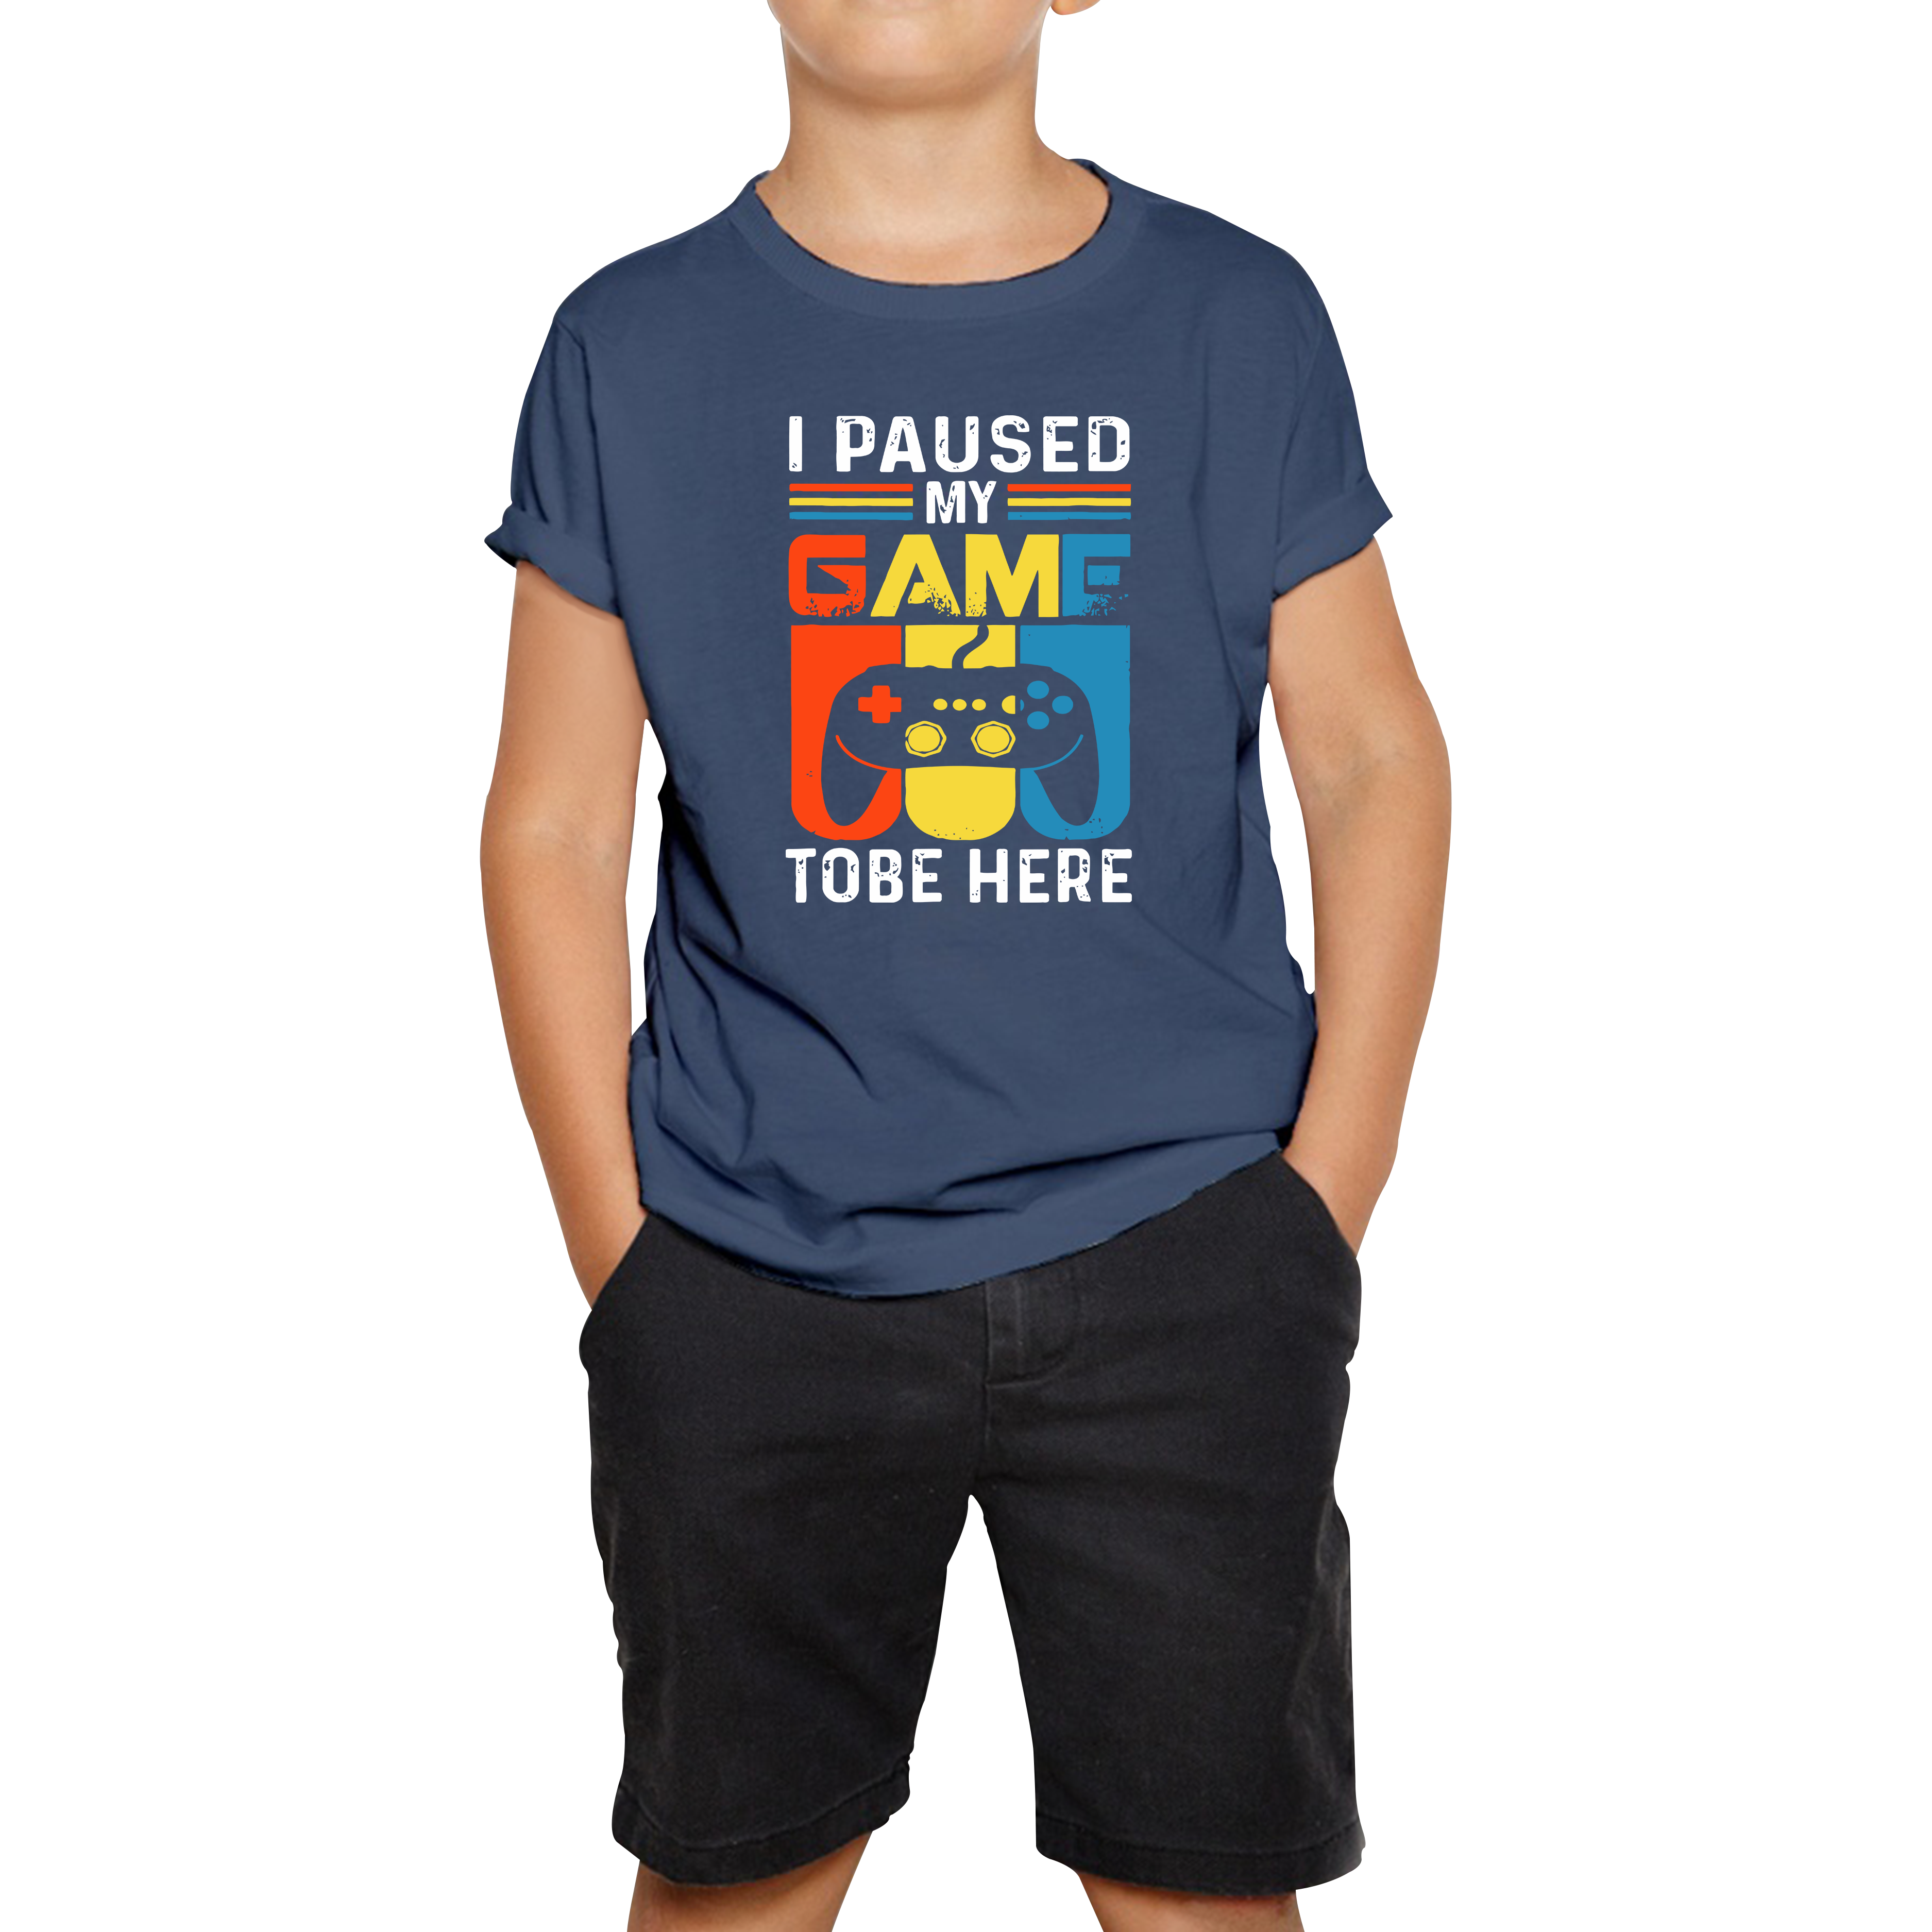 I Paused My Game To Be Here Funny Novelty Sarcastic Video Game Kids T Shirt